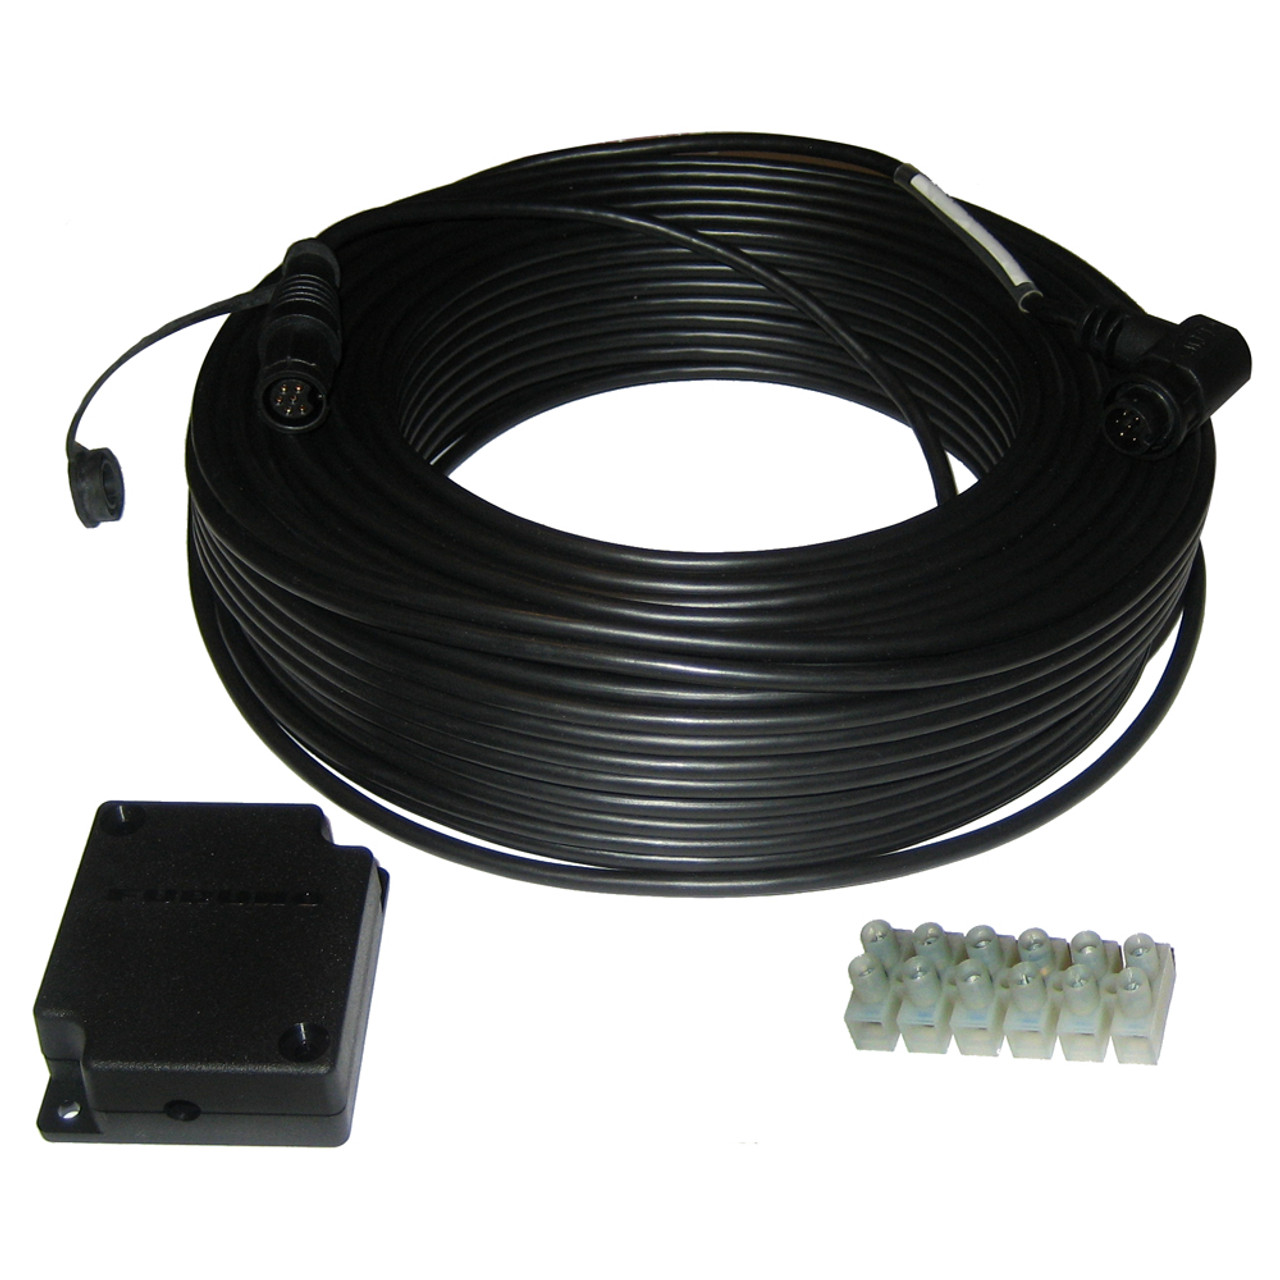 Furuno - 50M Cable Kit with Junction Box for FI5001 - Apollo Lighting